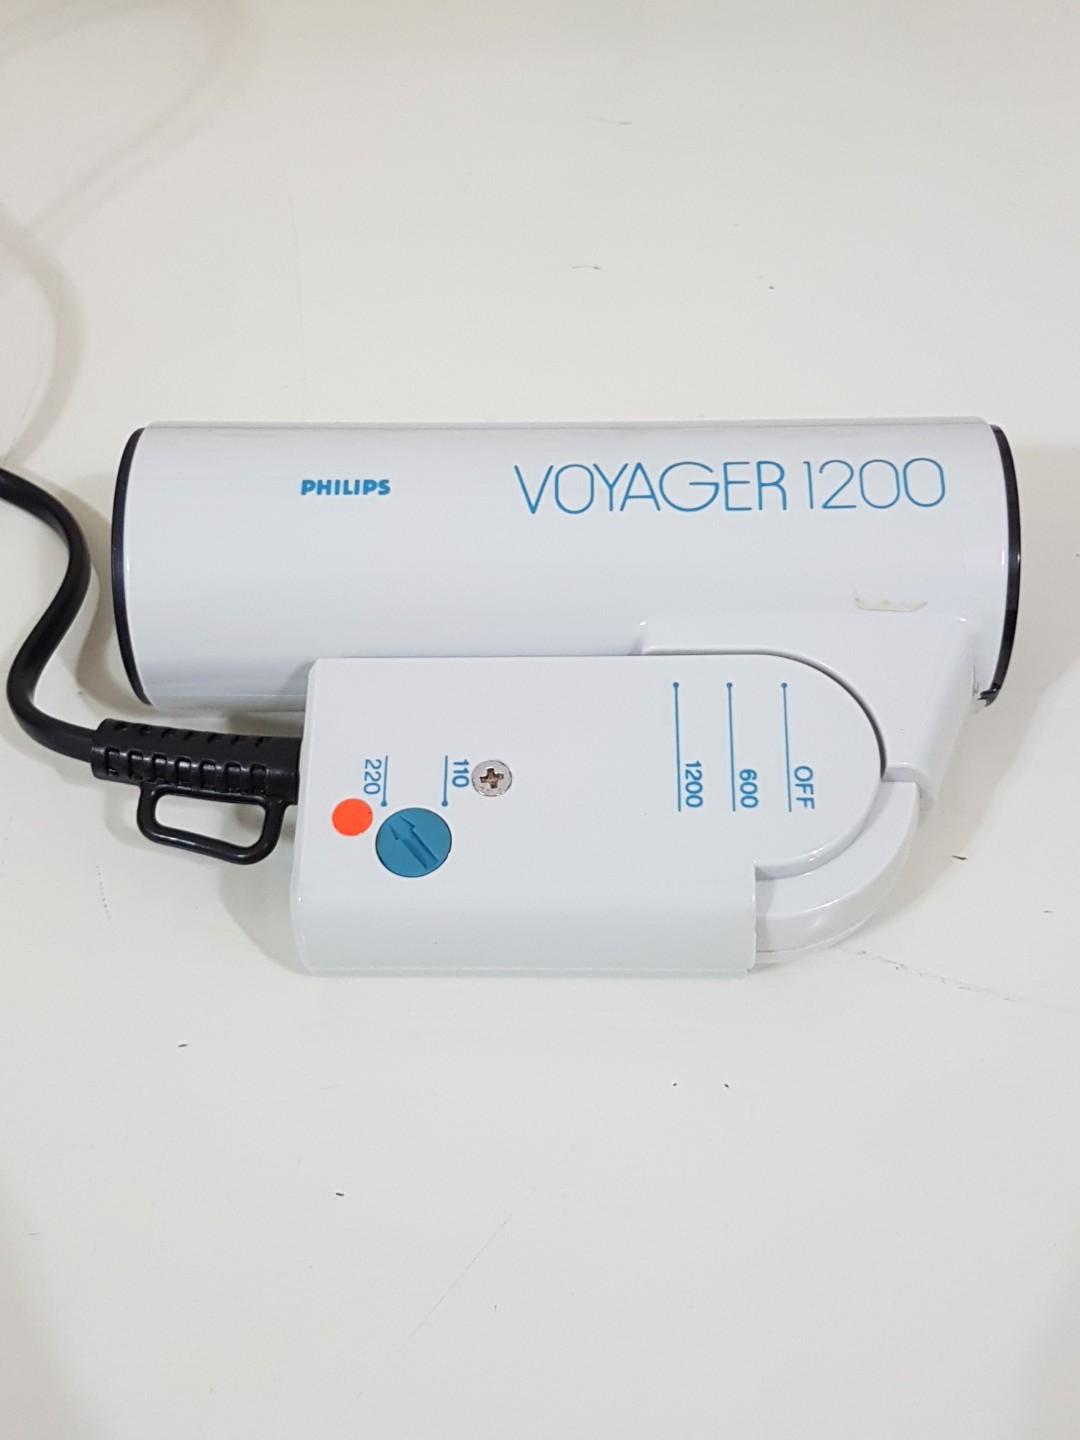 philips voyager 1200 hair dryer